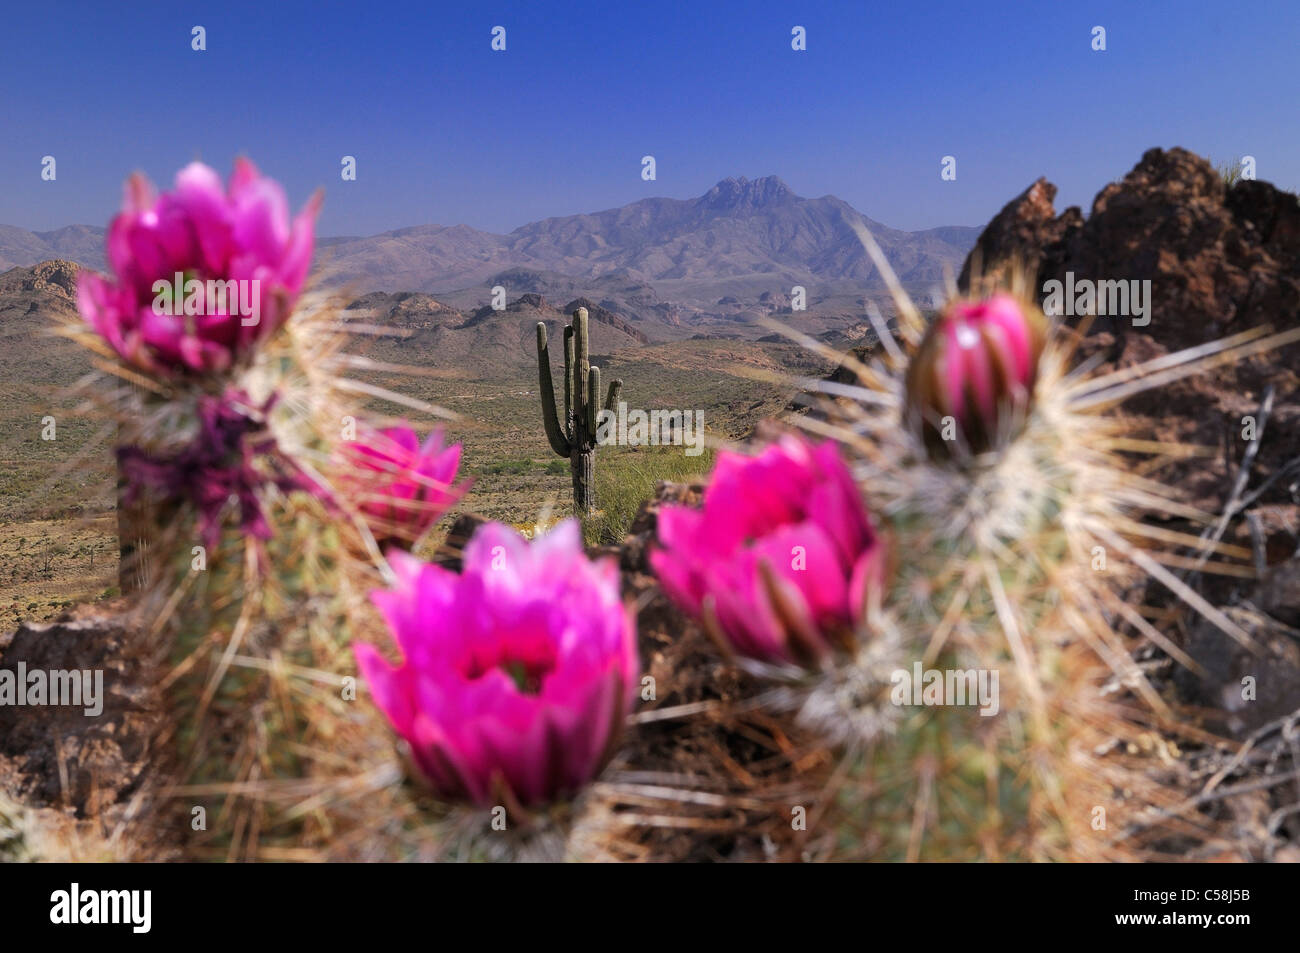 Cactus, flowers, Lost Dutchman, State Park, Apache Junction, USA, United States, America, plant Stock Photo